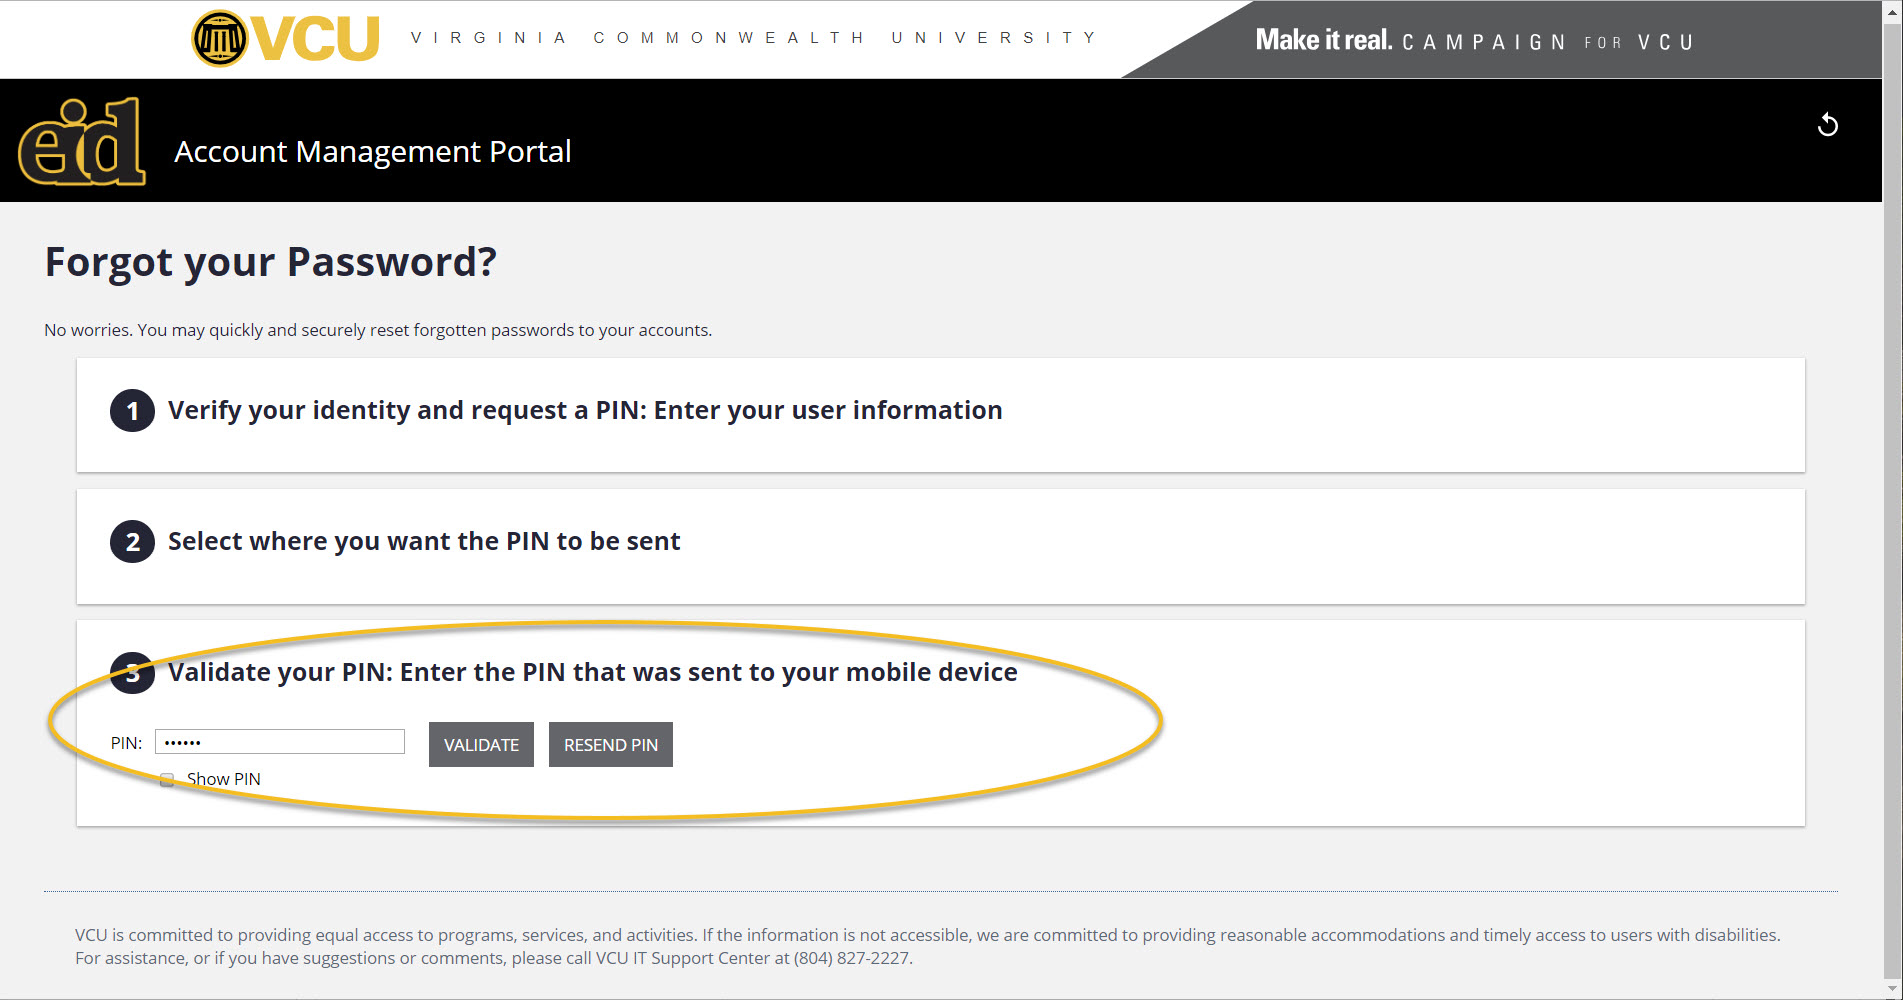 screenshot to enter PIN and validate it for password reset